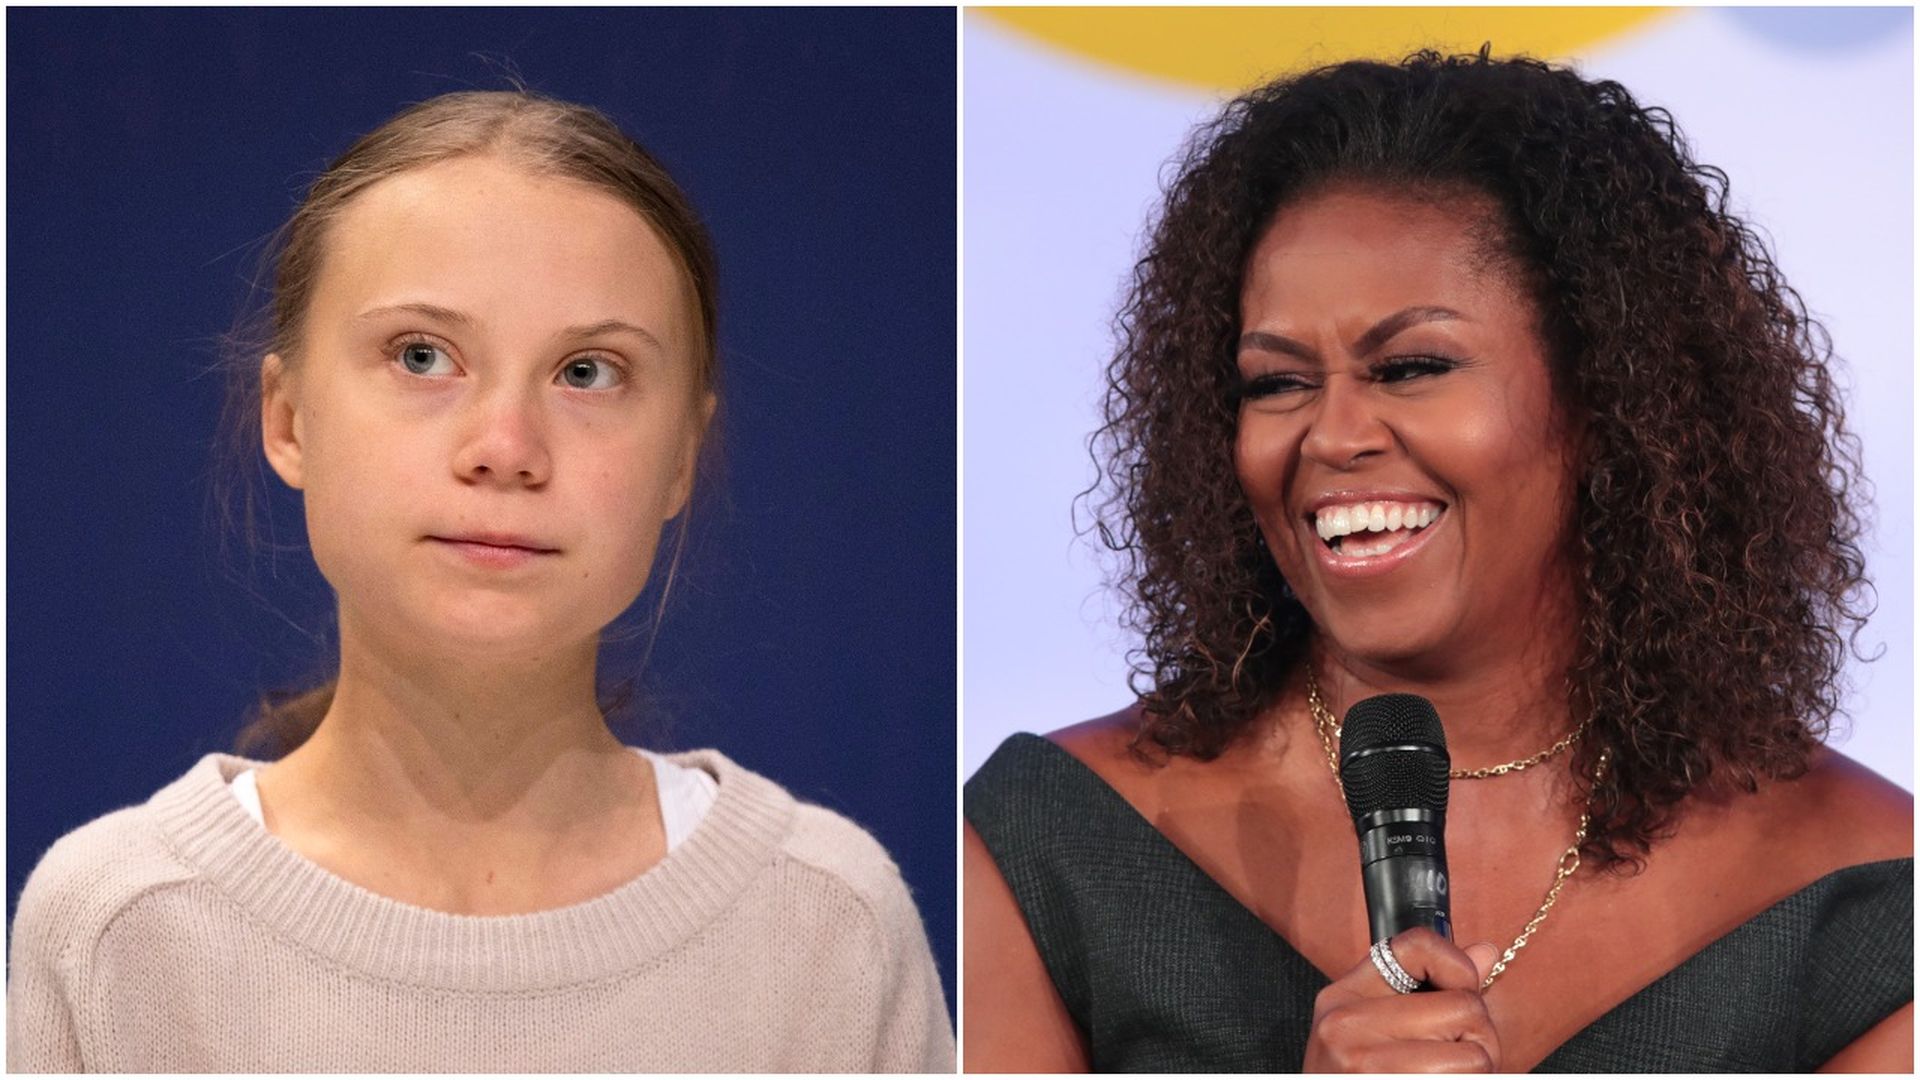 Greta Thunberg and former First Lady Michelle Obama